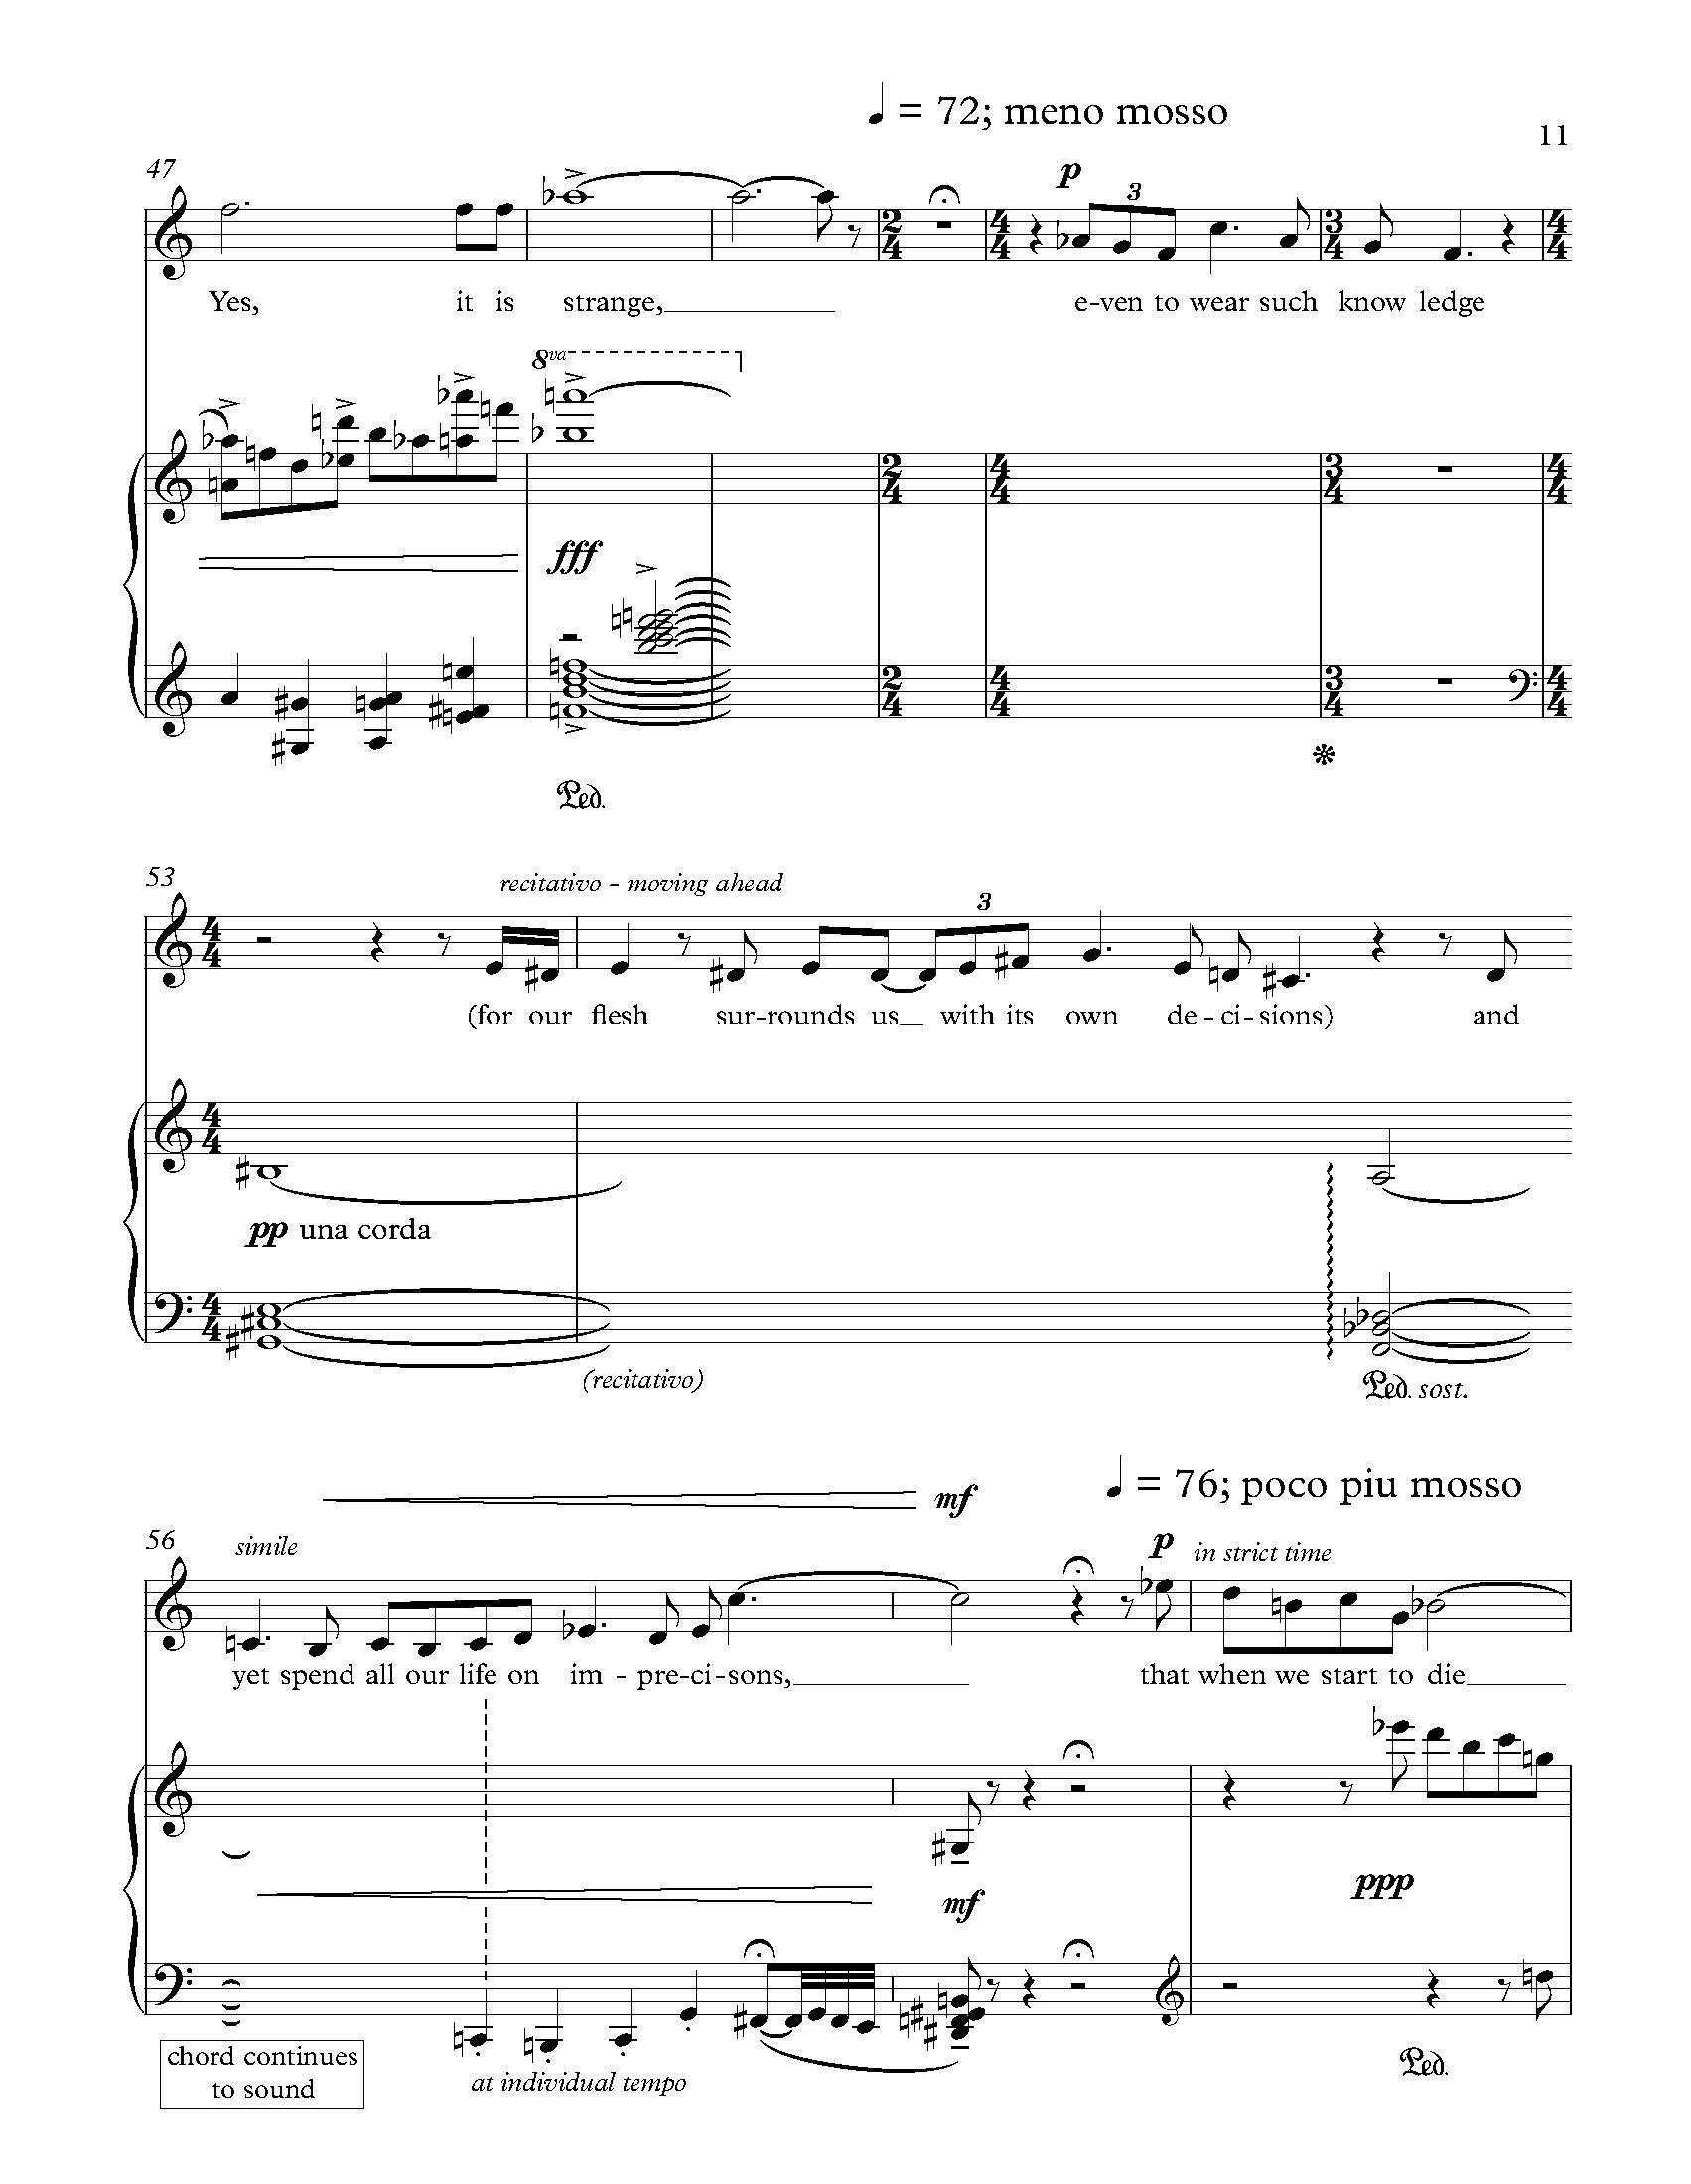 The Explosion - Complete Score_Page_17.jpg